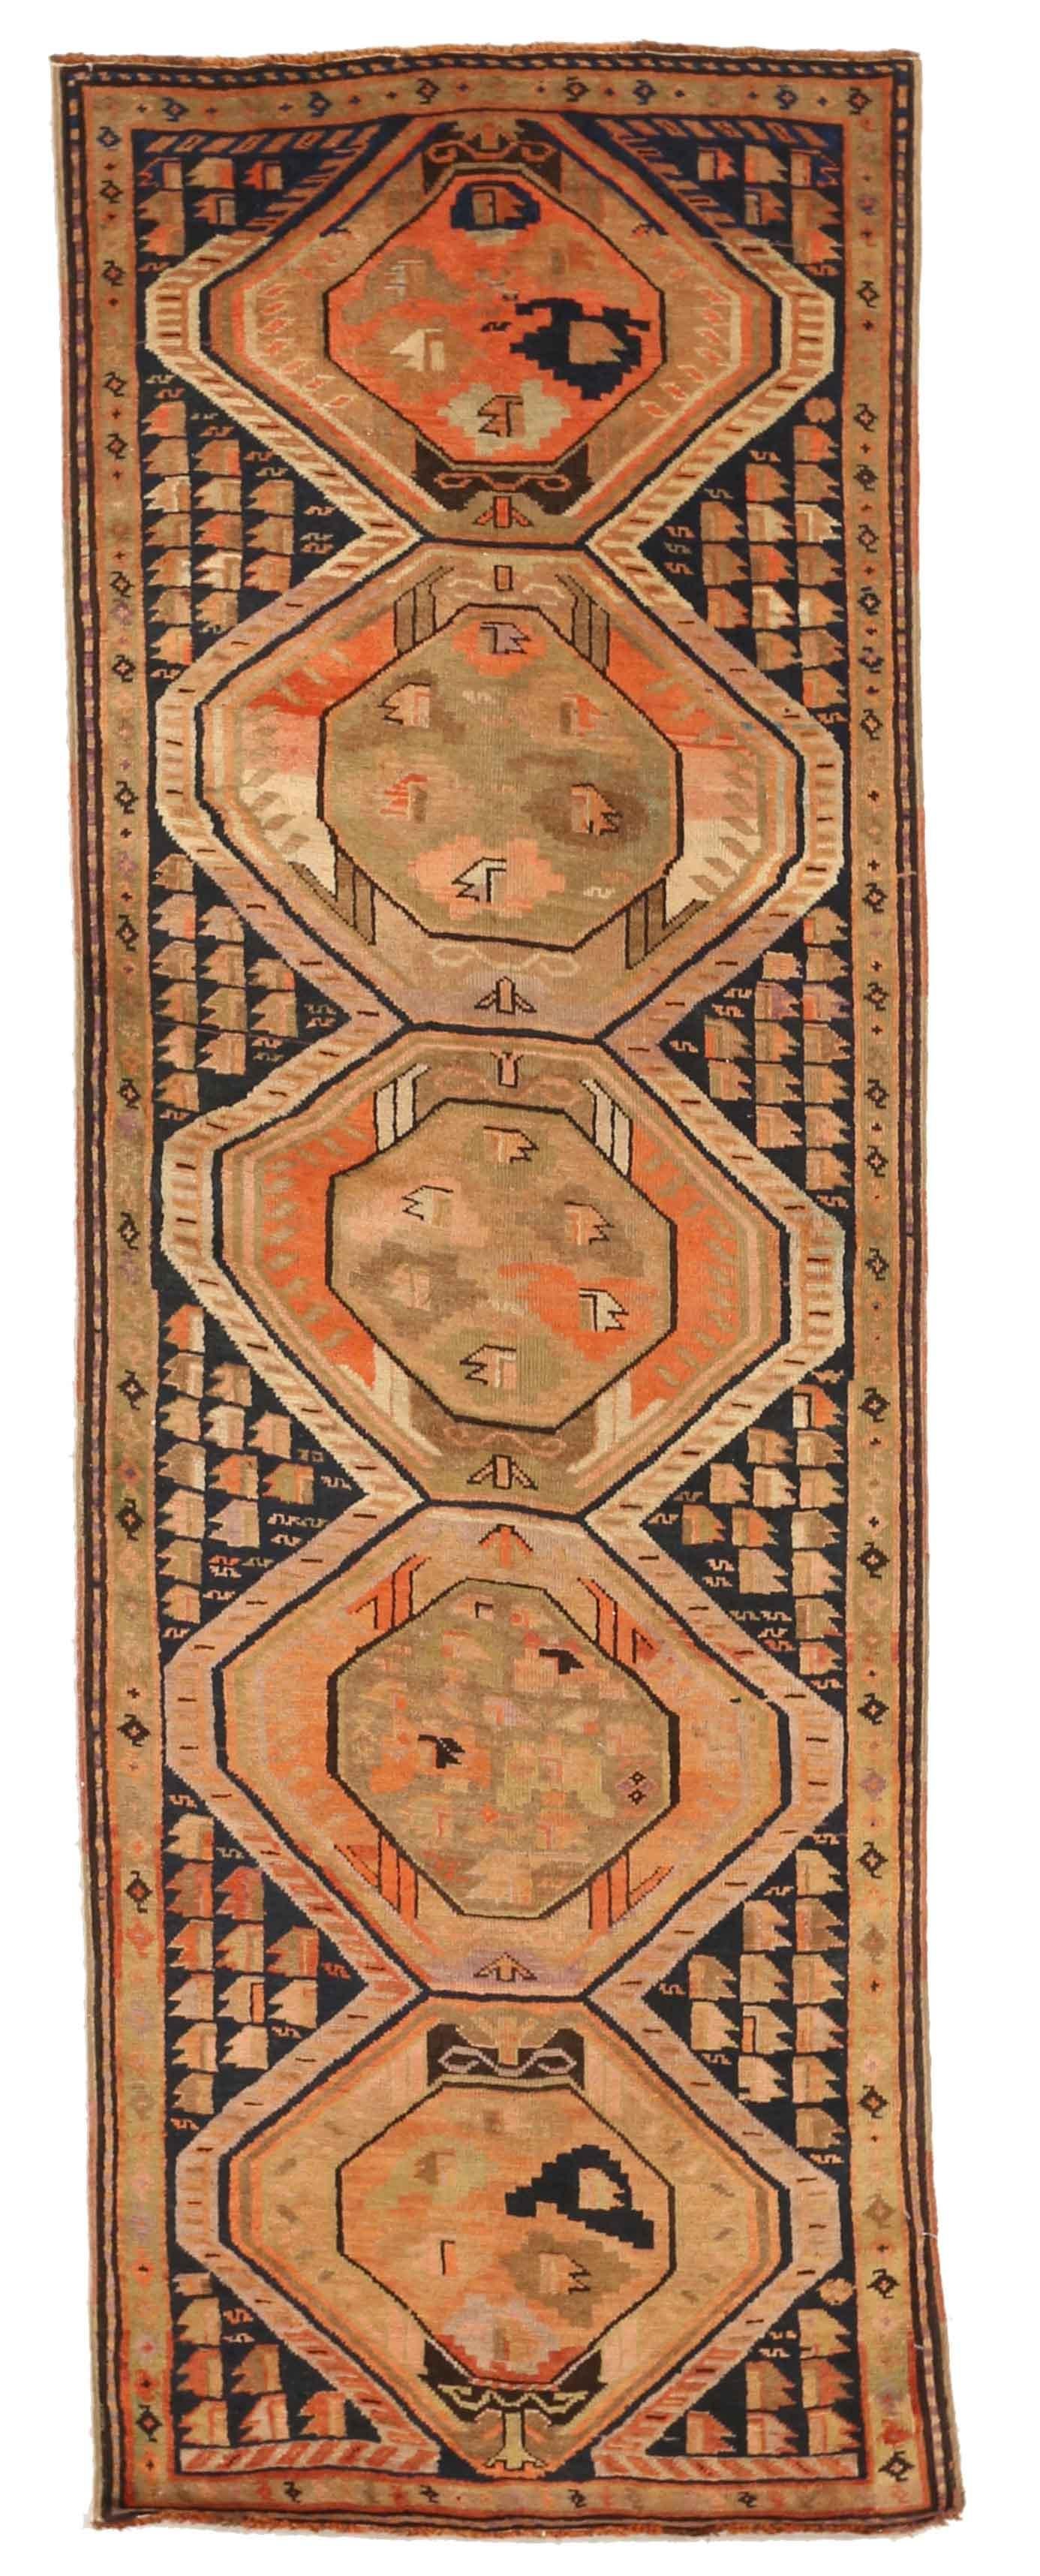 This finely knotted antique rug of Russian origin comes in a distinctive navy blue and coral green color combination. It will blend seamlessly in a minimalist or contemporary themed space.
This gem was crafted in the 1910s using Karabagh style of